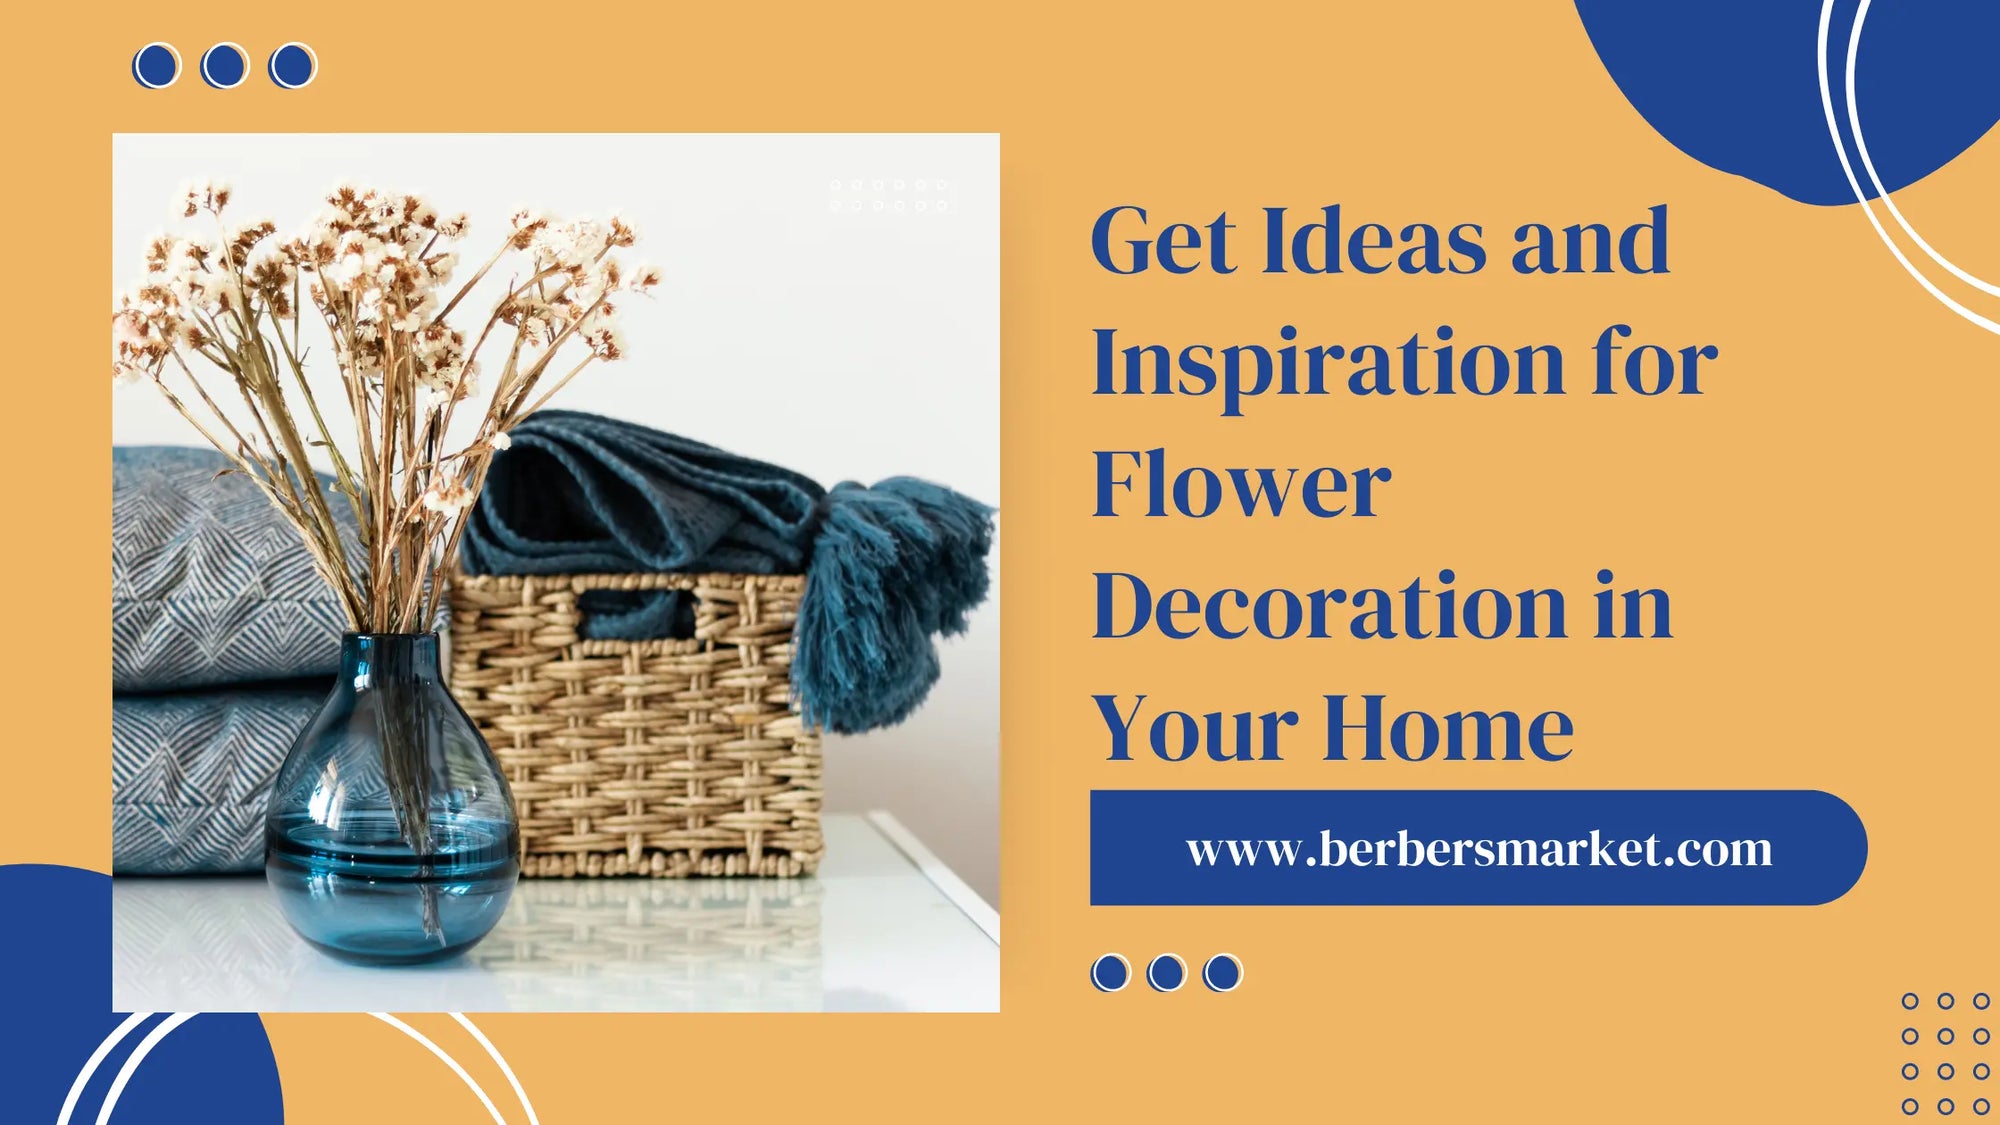 Get Ideas and Inspiration for Flower Decoration in Your Home